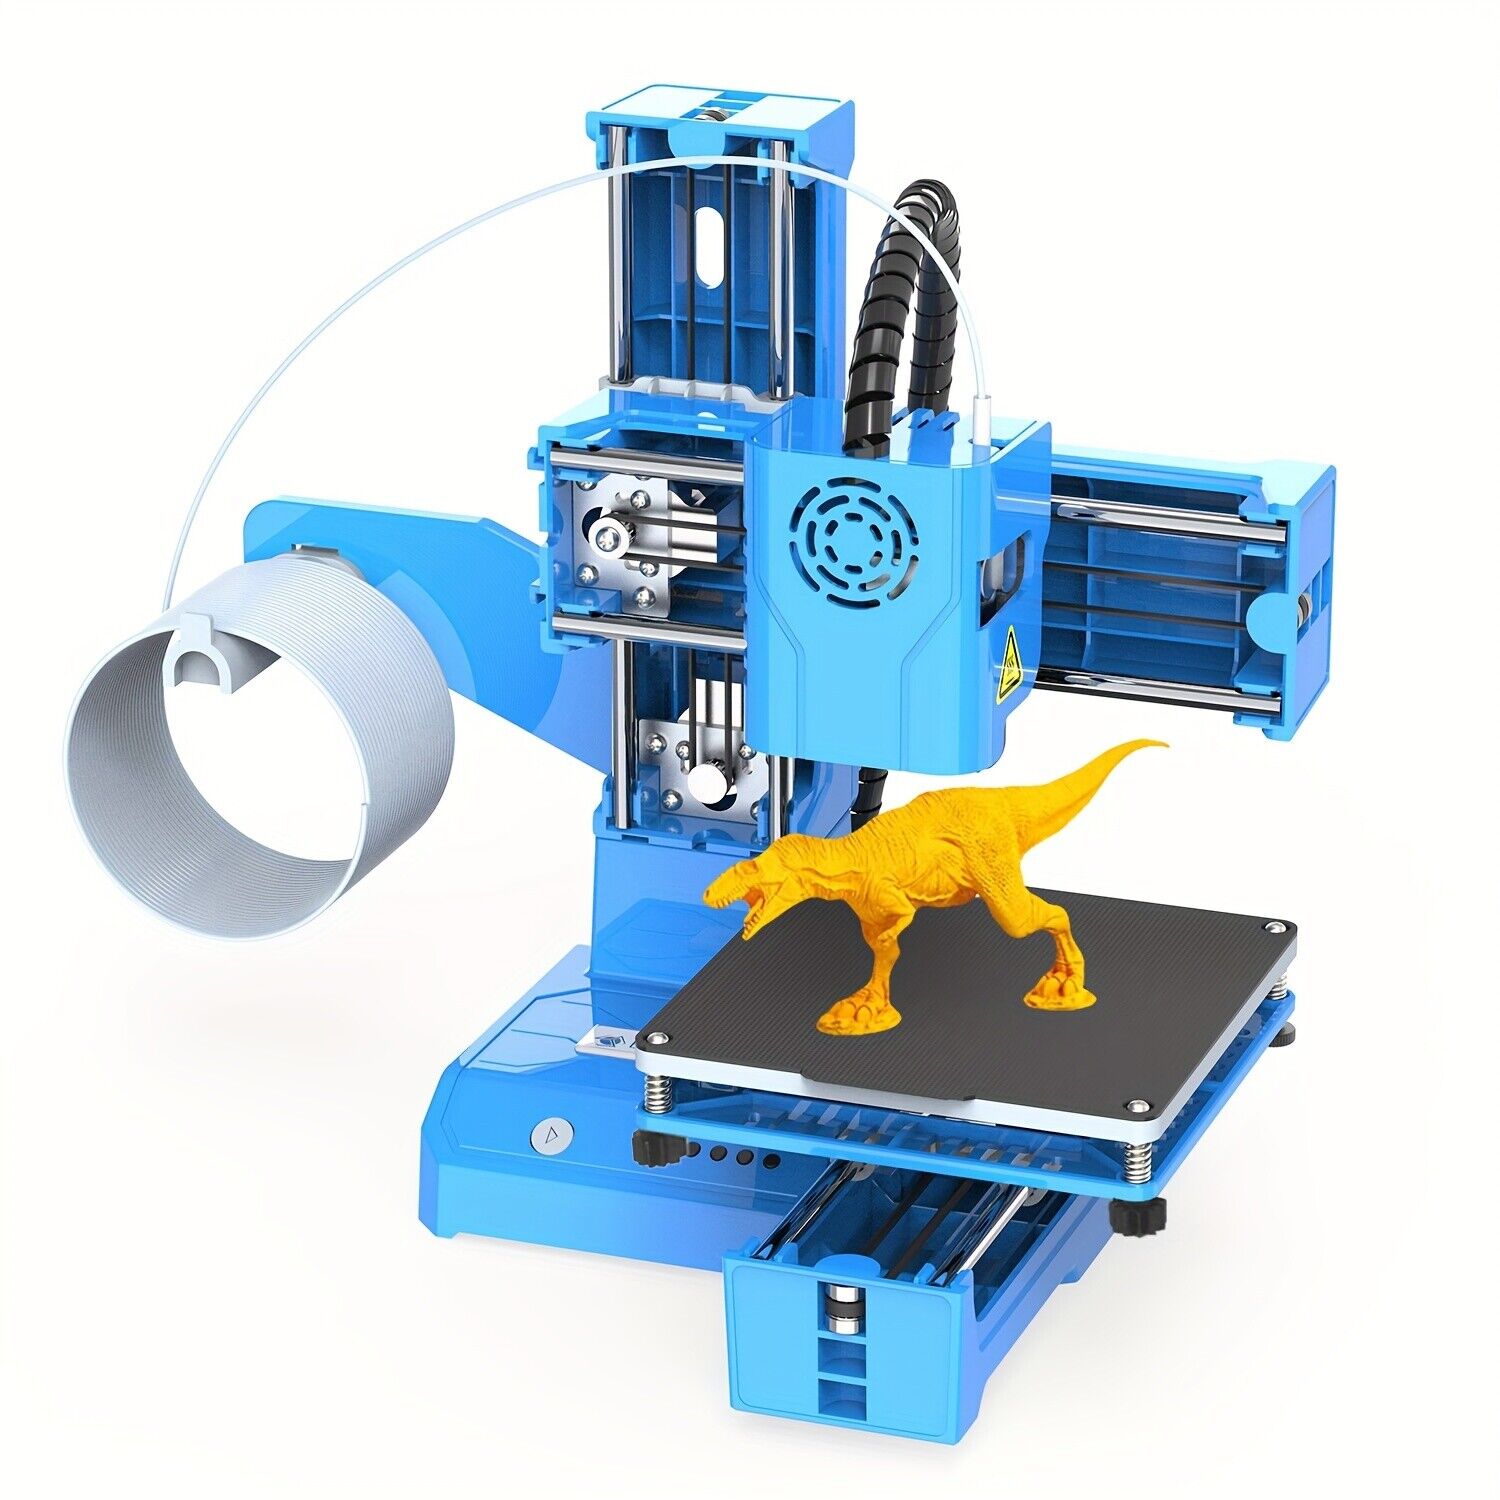 EasyThreed K9 Mini 3D Printer - Compact & Quiet for Home, Education and Students